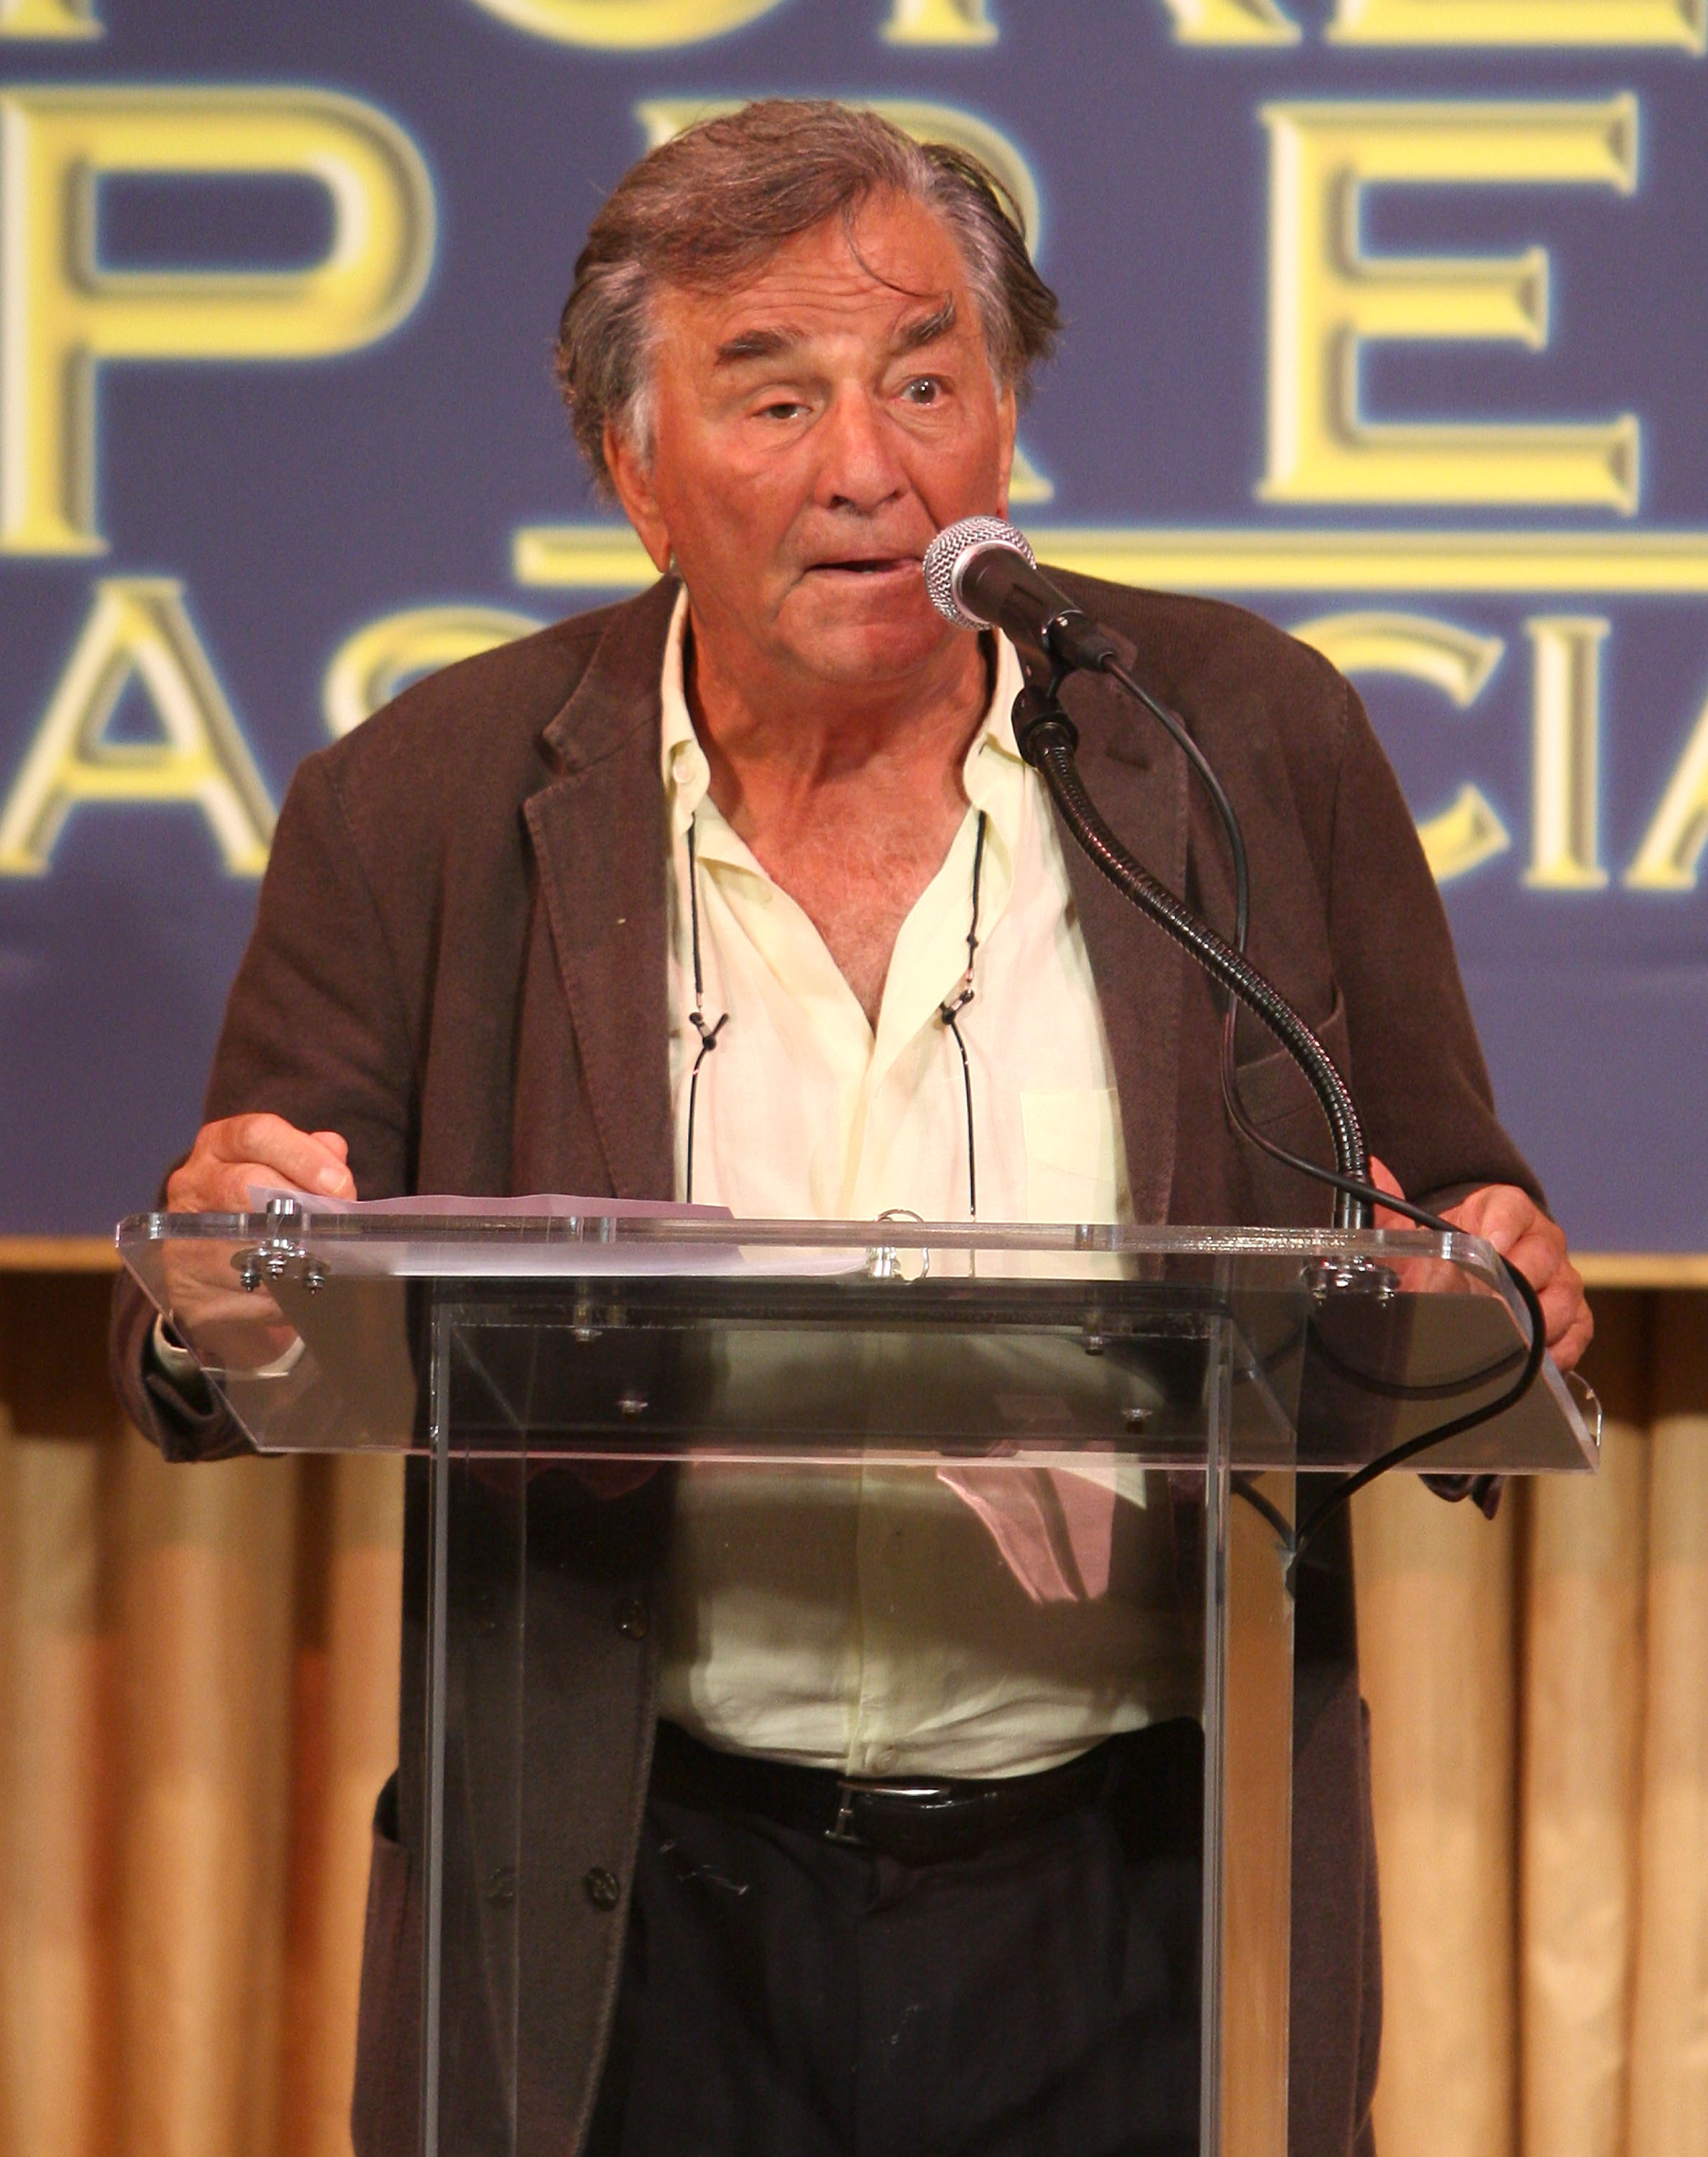 Peter Falk during the 2007 HFPA Annual Installation Luncheon at the Beverly Hills Hotel on August 9, 2007, in Beverly Hills, California. | Source: Getty Images